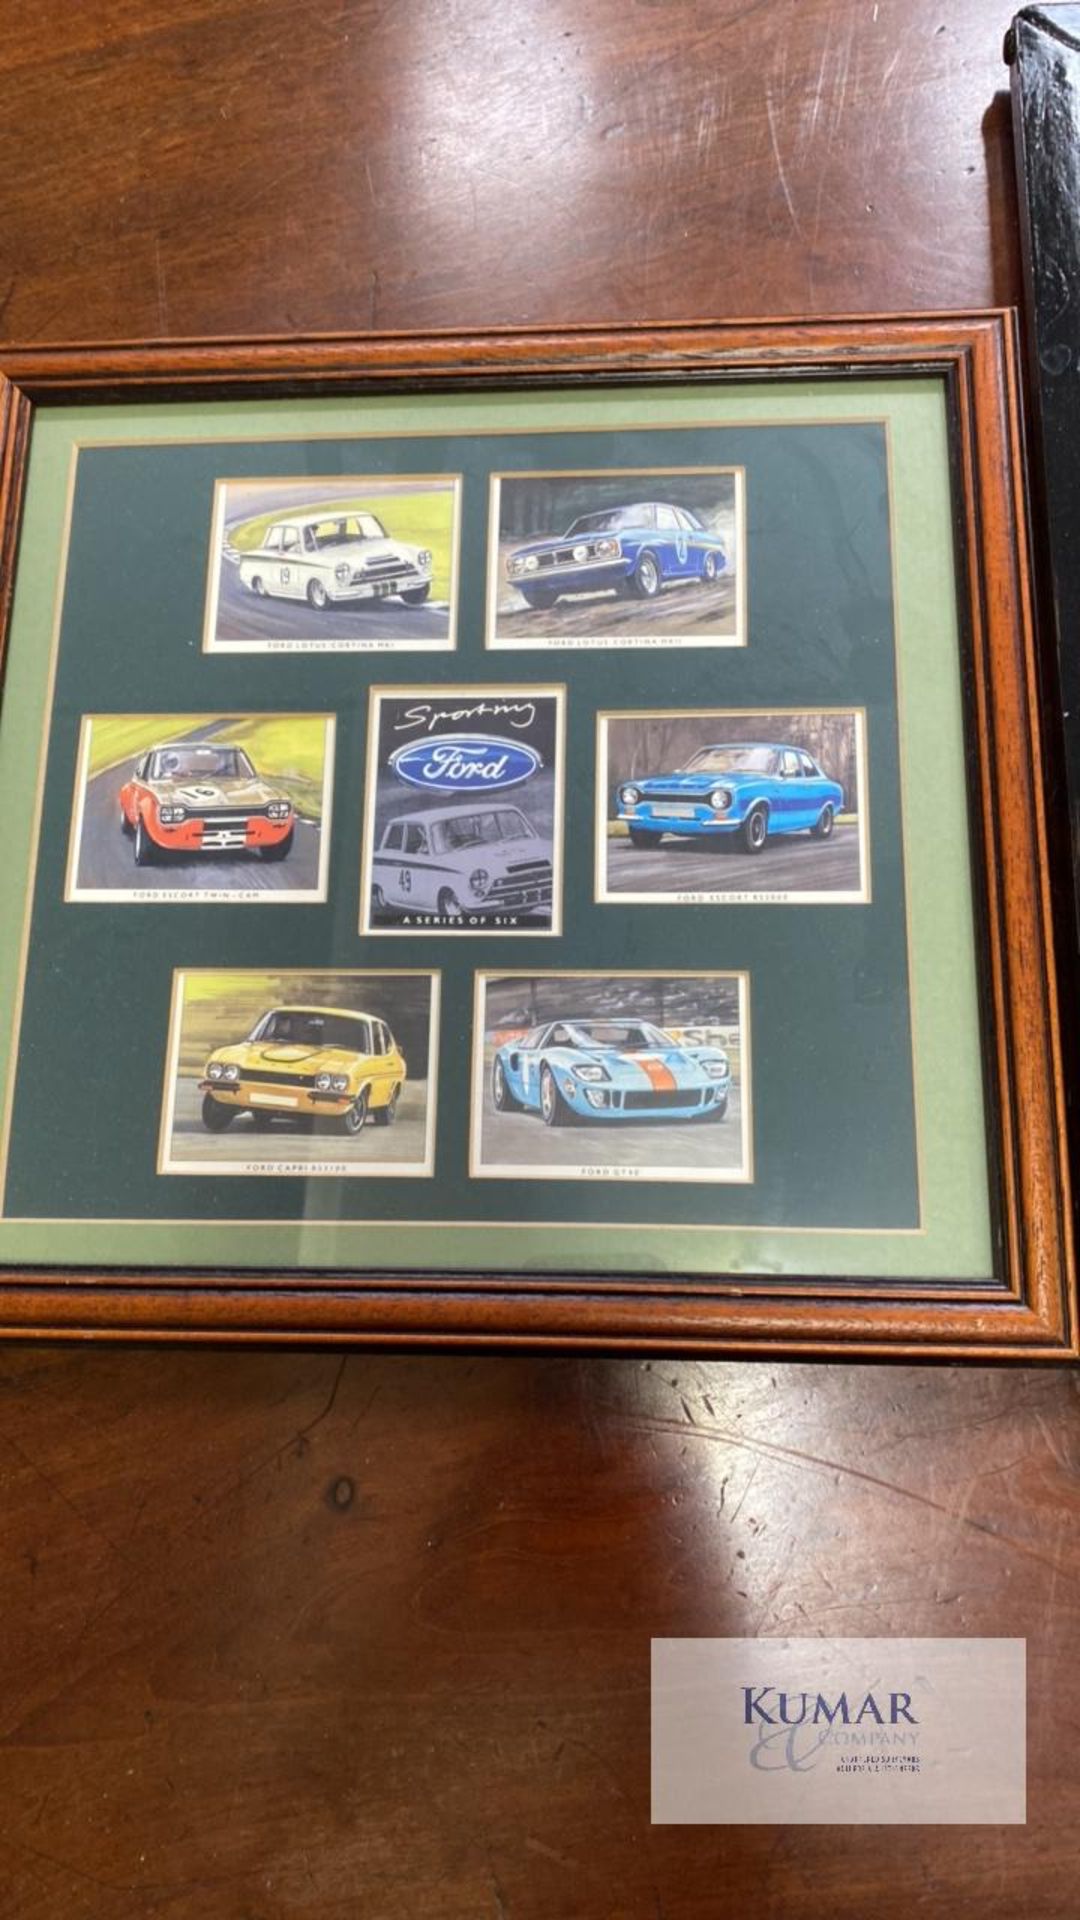 Sporting memorabilia to include Calendars and Framed Pictures - Image 11 of 19